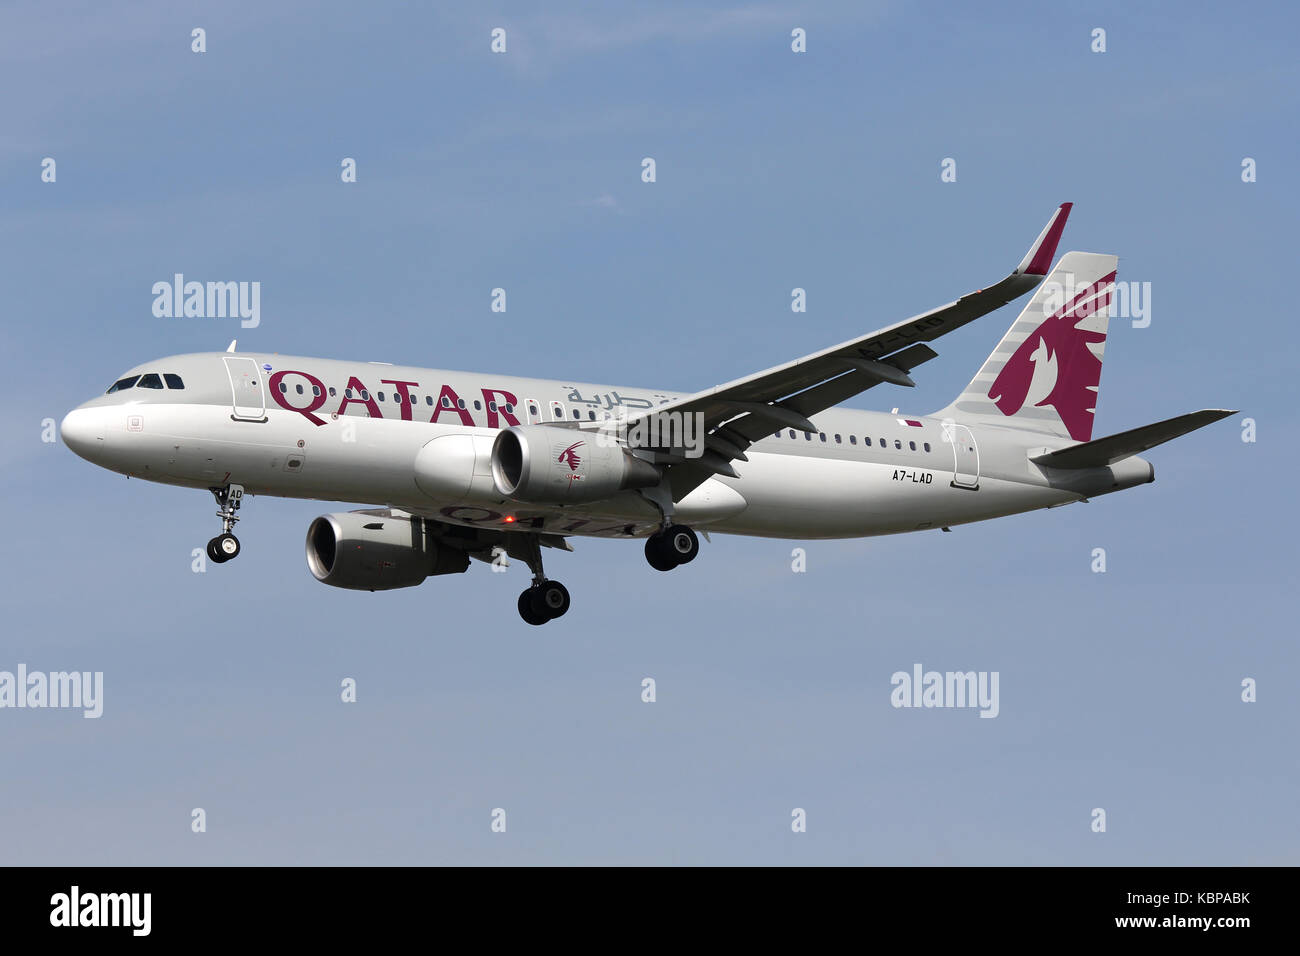 Qatar Airways A320 A7-LAD landing at London Gatwick airport Stock Photo